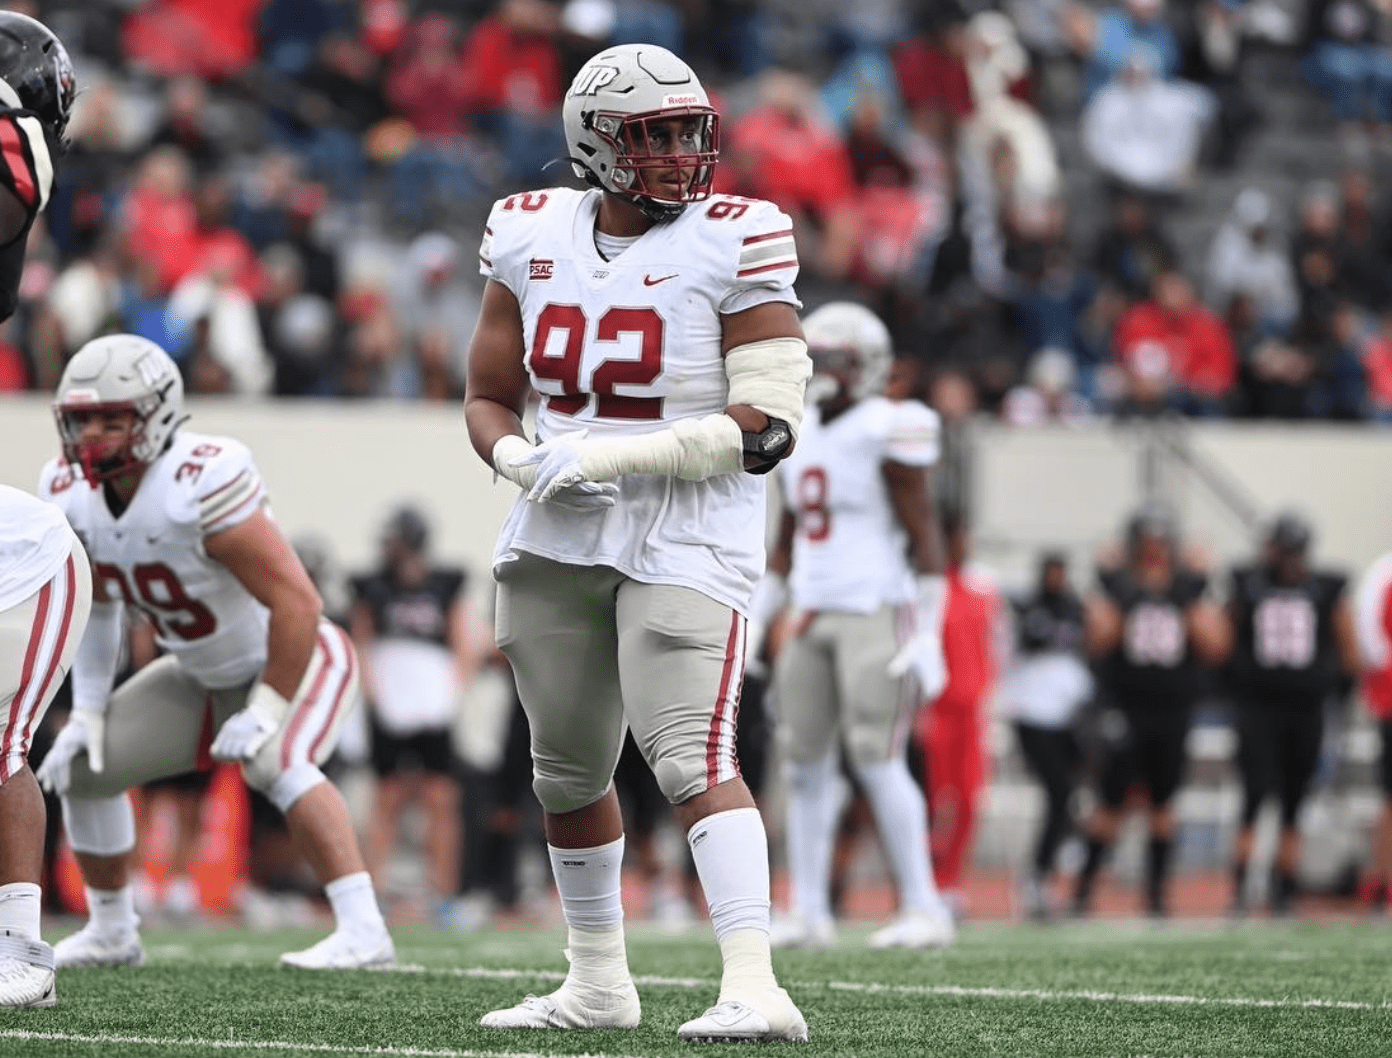 Raunya Mitchell the standout defensive lineman from Indiana University of Pennsylvania recently sat down with Draft Diamonds scout Justin Berendzen.